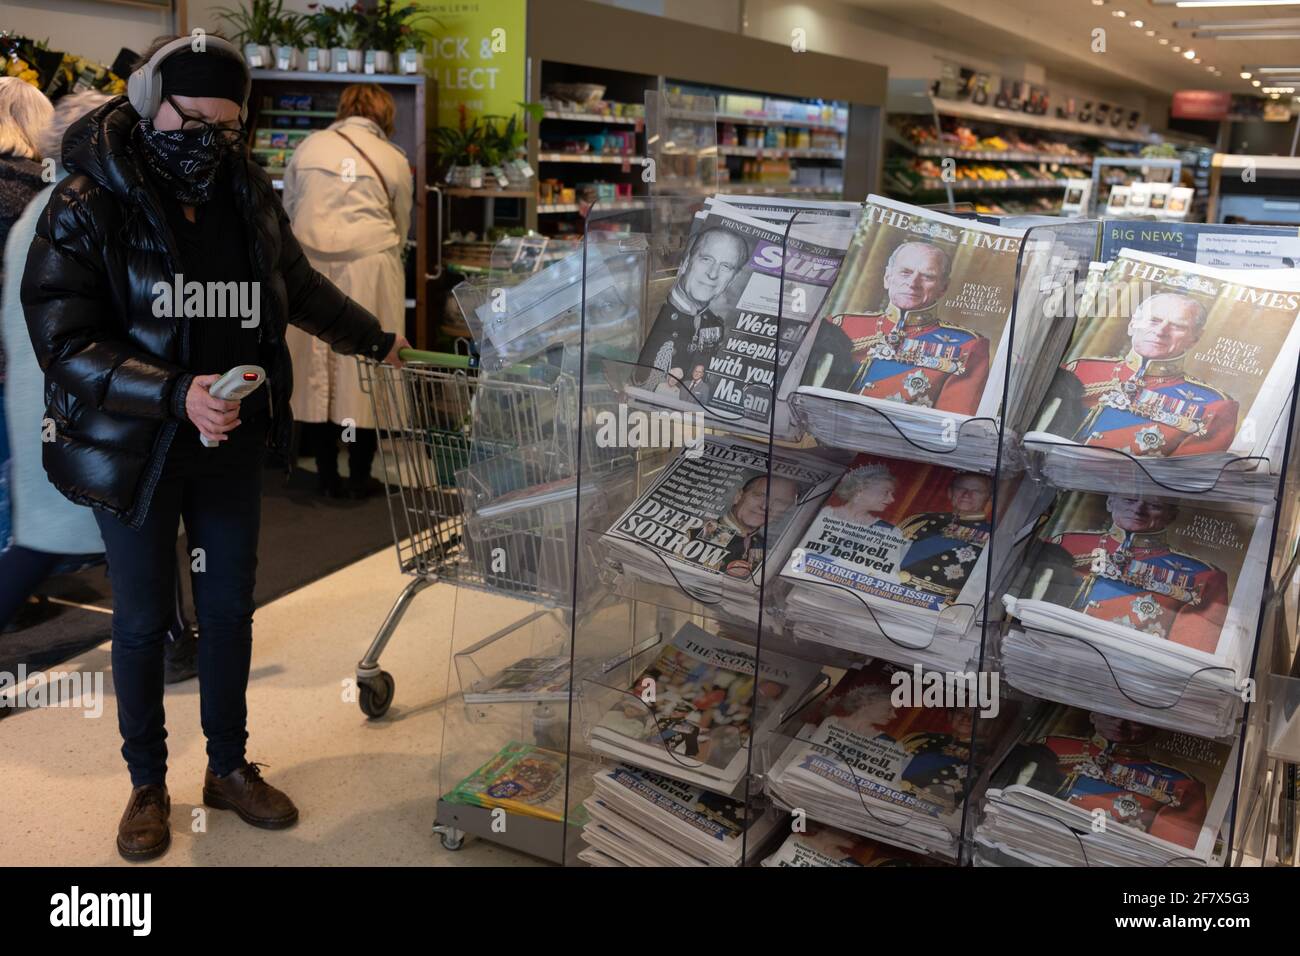 Glasgow, UK, 10th April 2021. Shoppers, wearing face masks due to the Covid-19 CoronaVirus health pandemic, pass by a display of newspapers announcing the death of His Royal Highness Prince Philip, Duke of Edinburgh, at the age of 99-years. Photo credit: Jeremy Sutton-Hibbert/Alamy Live News Stock Photo